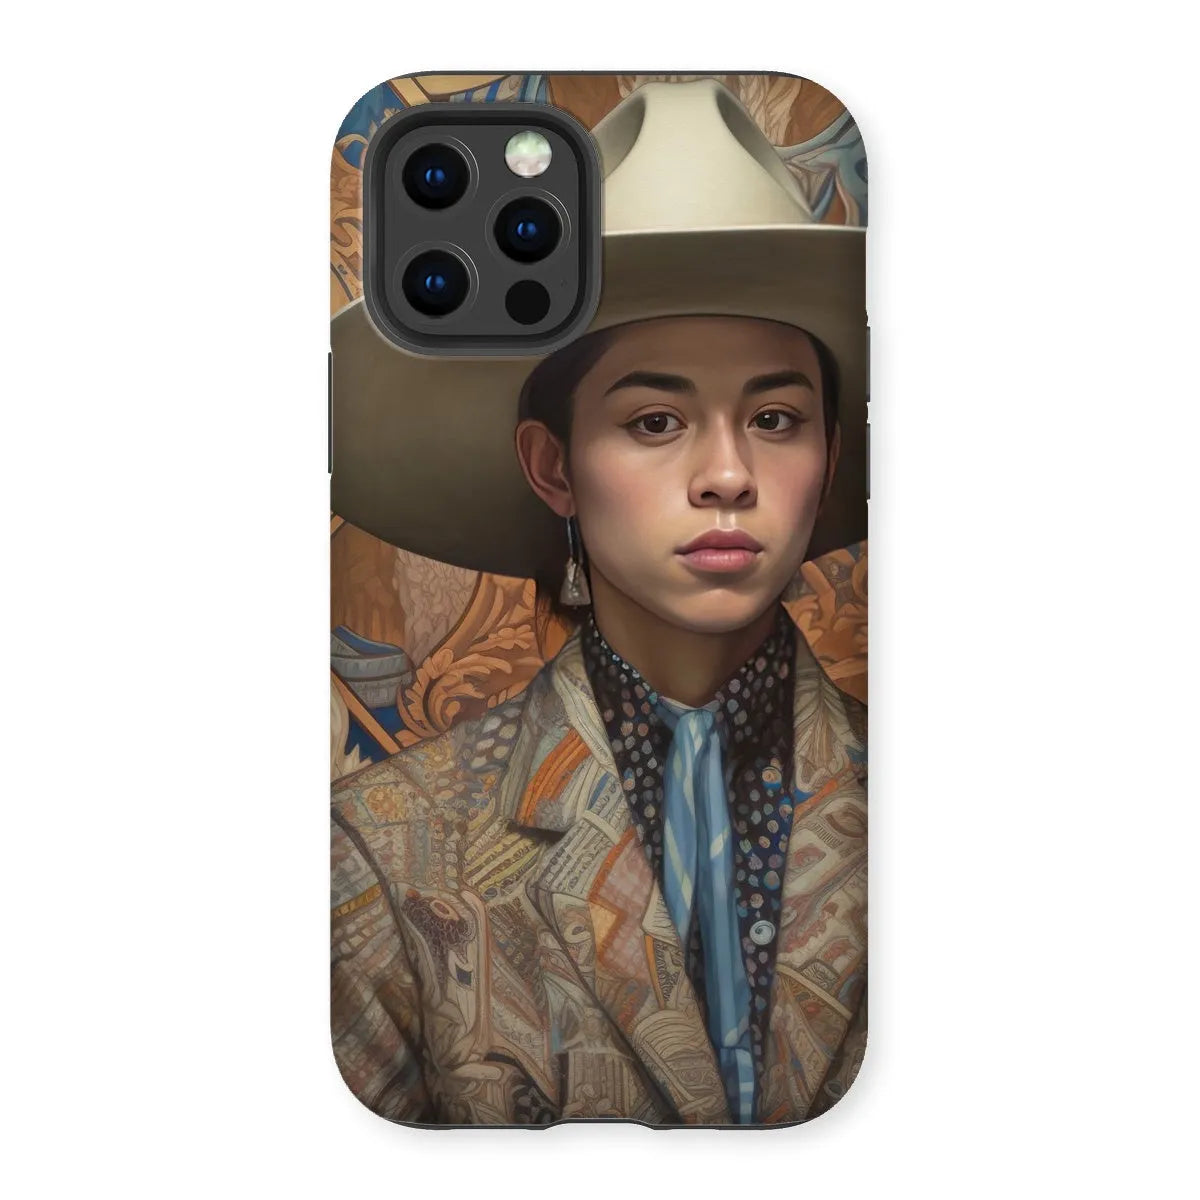 Angel The Transgender Cowboy - F2m Outlaw Art Phone Case - Iphone 12 Pro / Matte - Mobile Phone Cases - Aesthetic Art